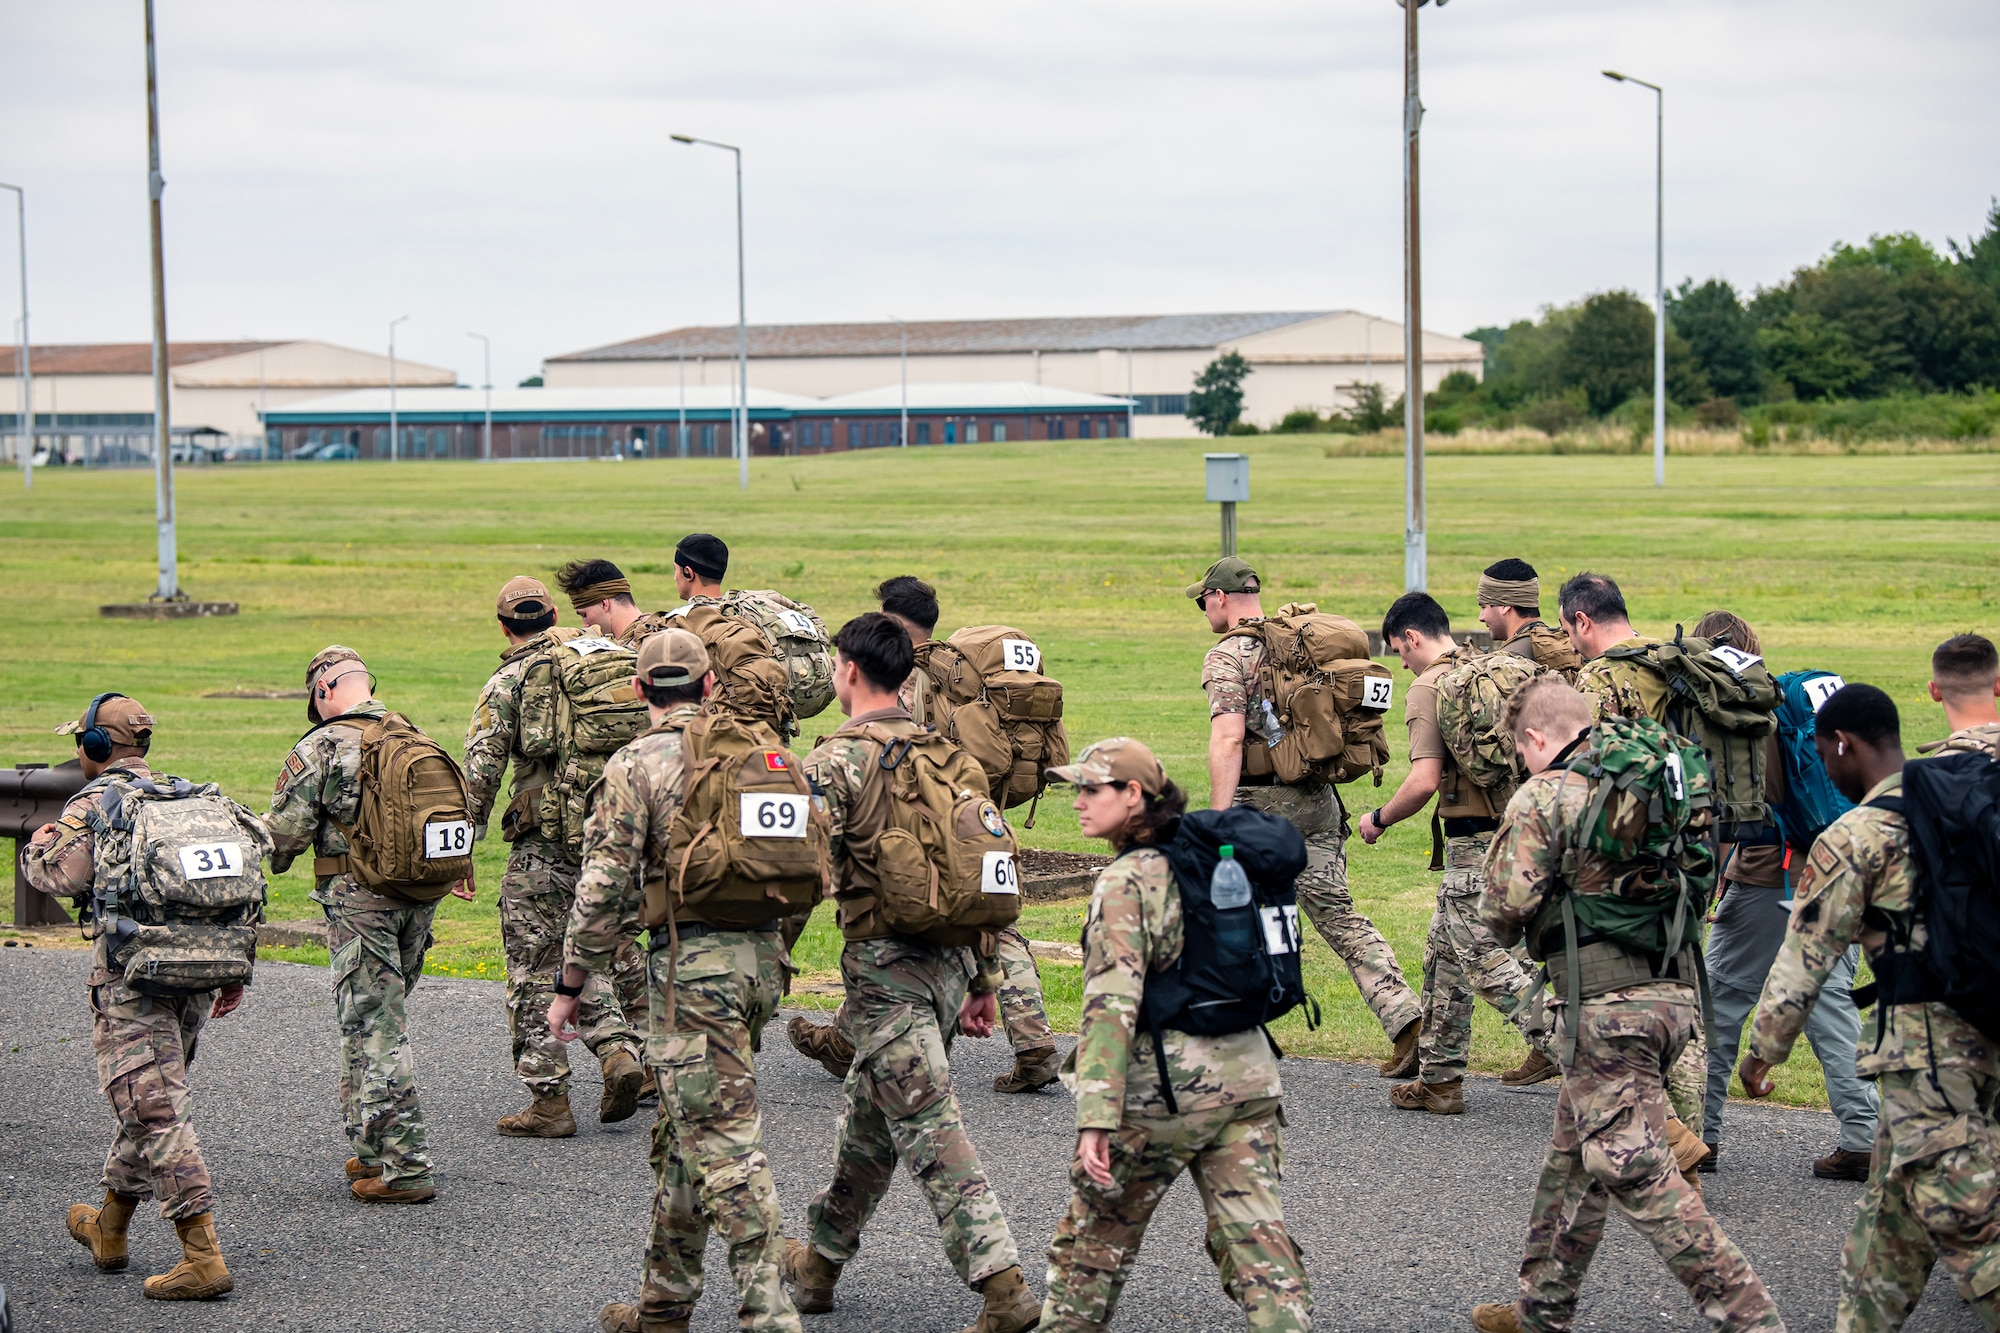 Participants complete a ruck march at RAF Molesworth, England, Aug. 18, 2023.Over 100 personnel from the 501st CSW and mission partner units participated in a 25 Kilometer Danish Contingent ruck march, which allowed them to test their physical capabilities and encouraged social bonds between joint forces. The DANCON ruck march has been completed in numerous countries throughout the world since it was established in 1972. (U.S. Air Force photo by Staff Sgt. Eugene Oliver)